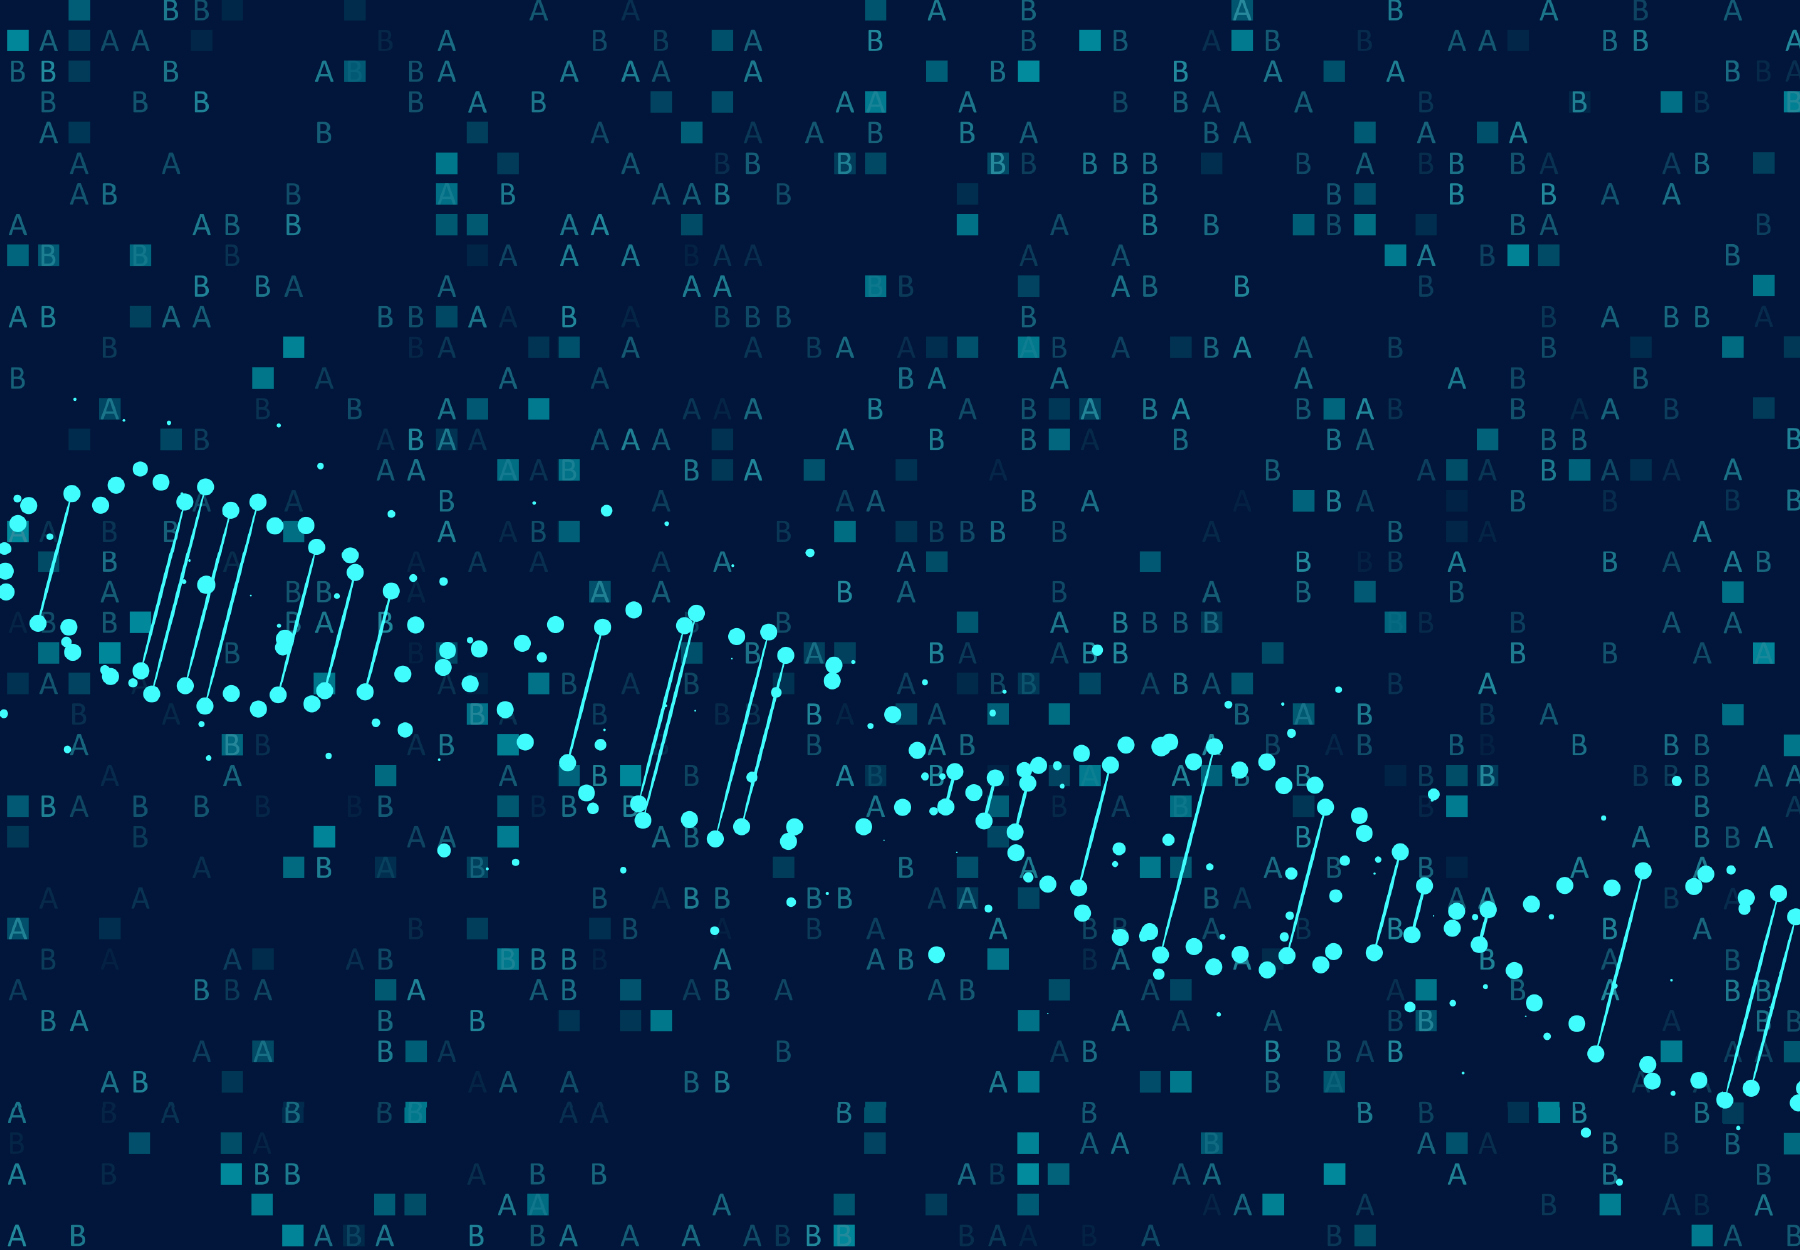 Abstract green DNA strand on dark blue/green background. Genetic testing billing and coding concept. iStock image.